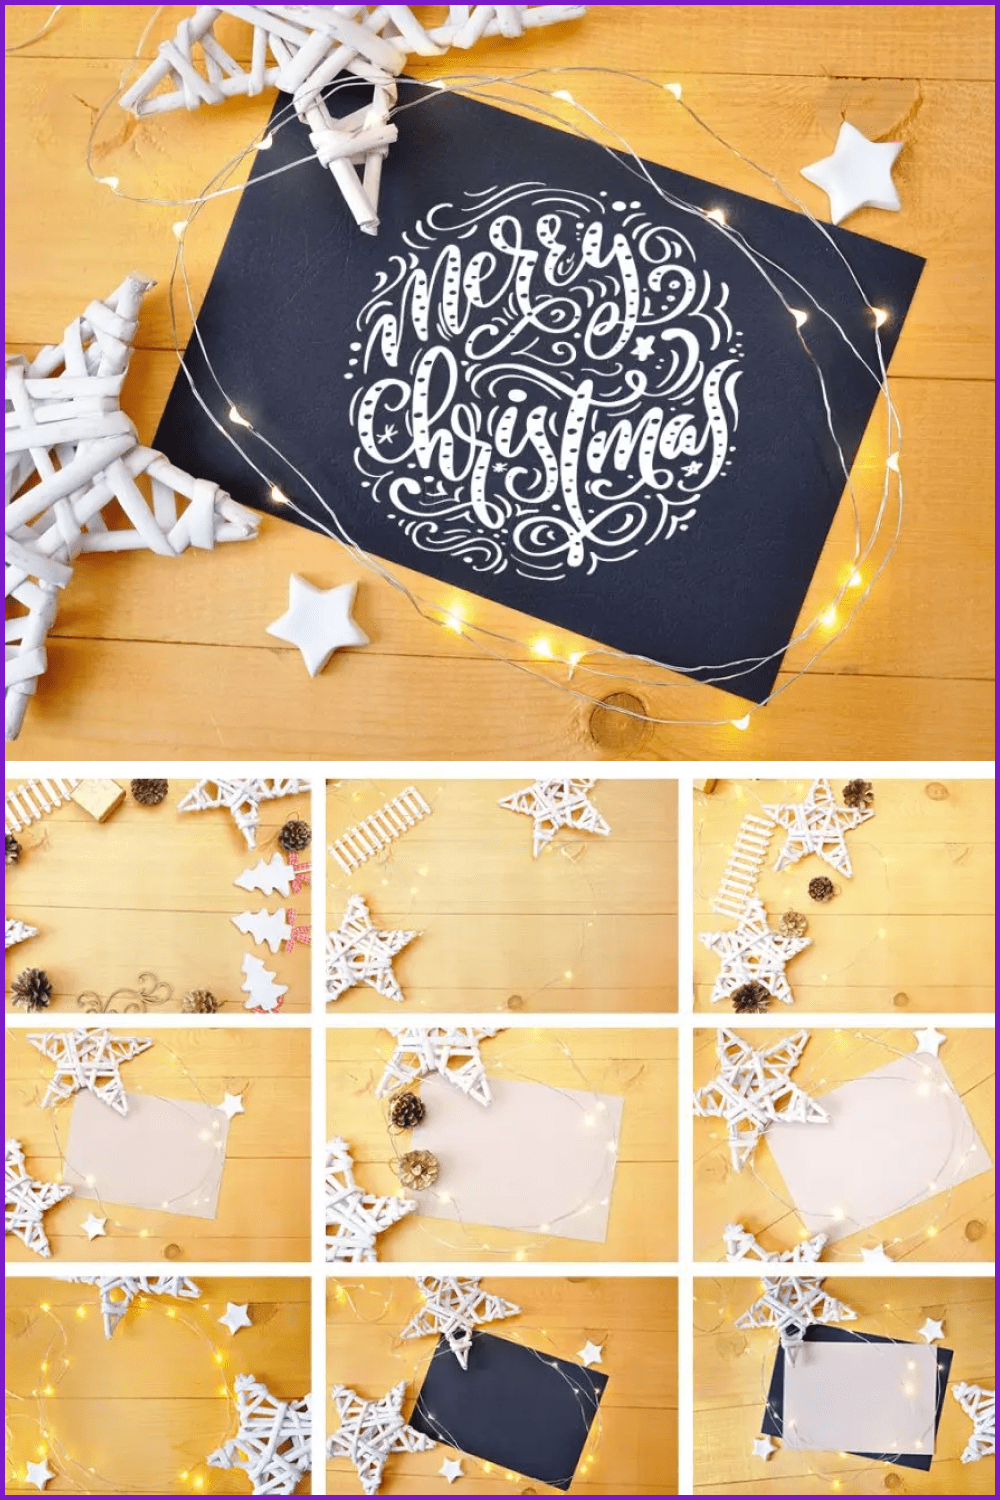 A collage of photographs of a white or black sheet on a table surrounded by Christmas decorations.